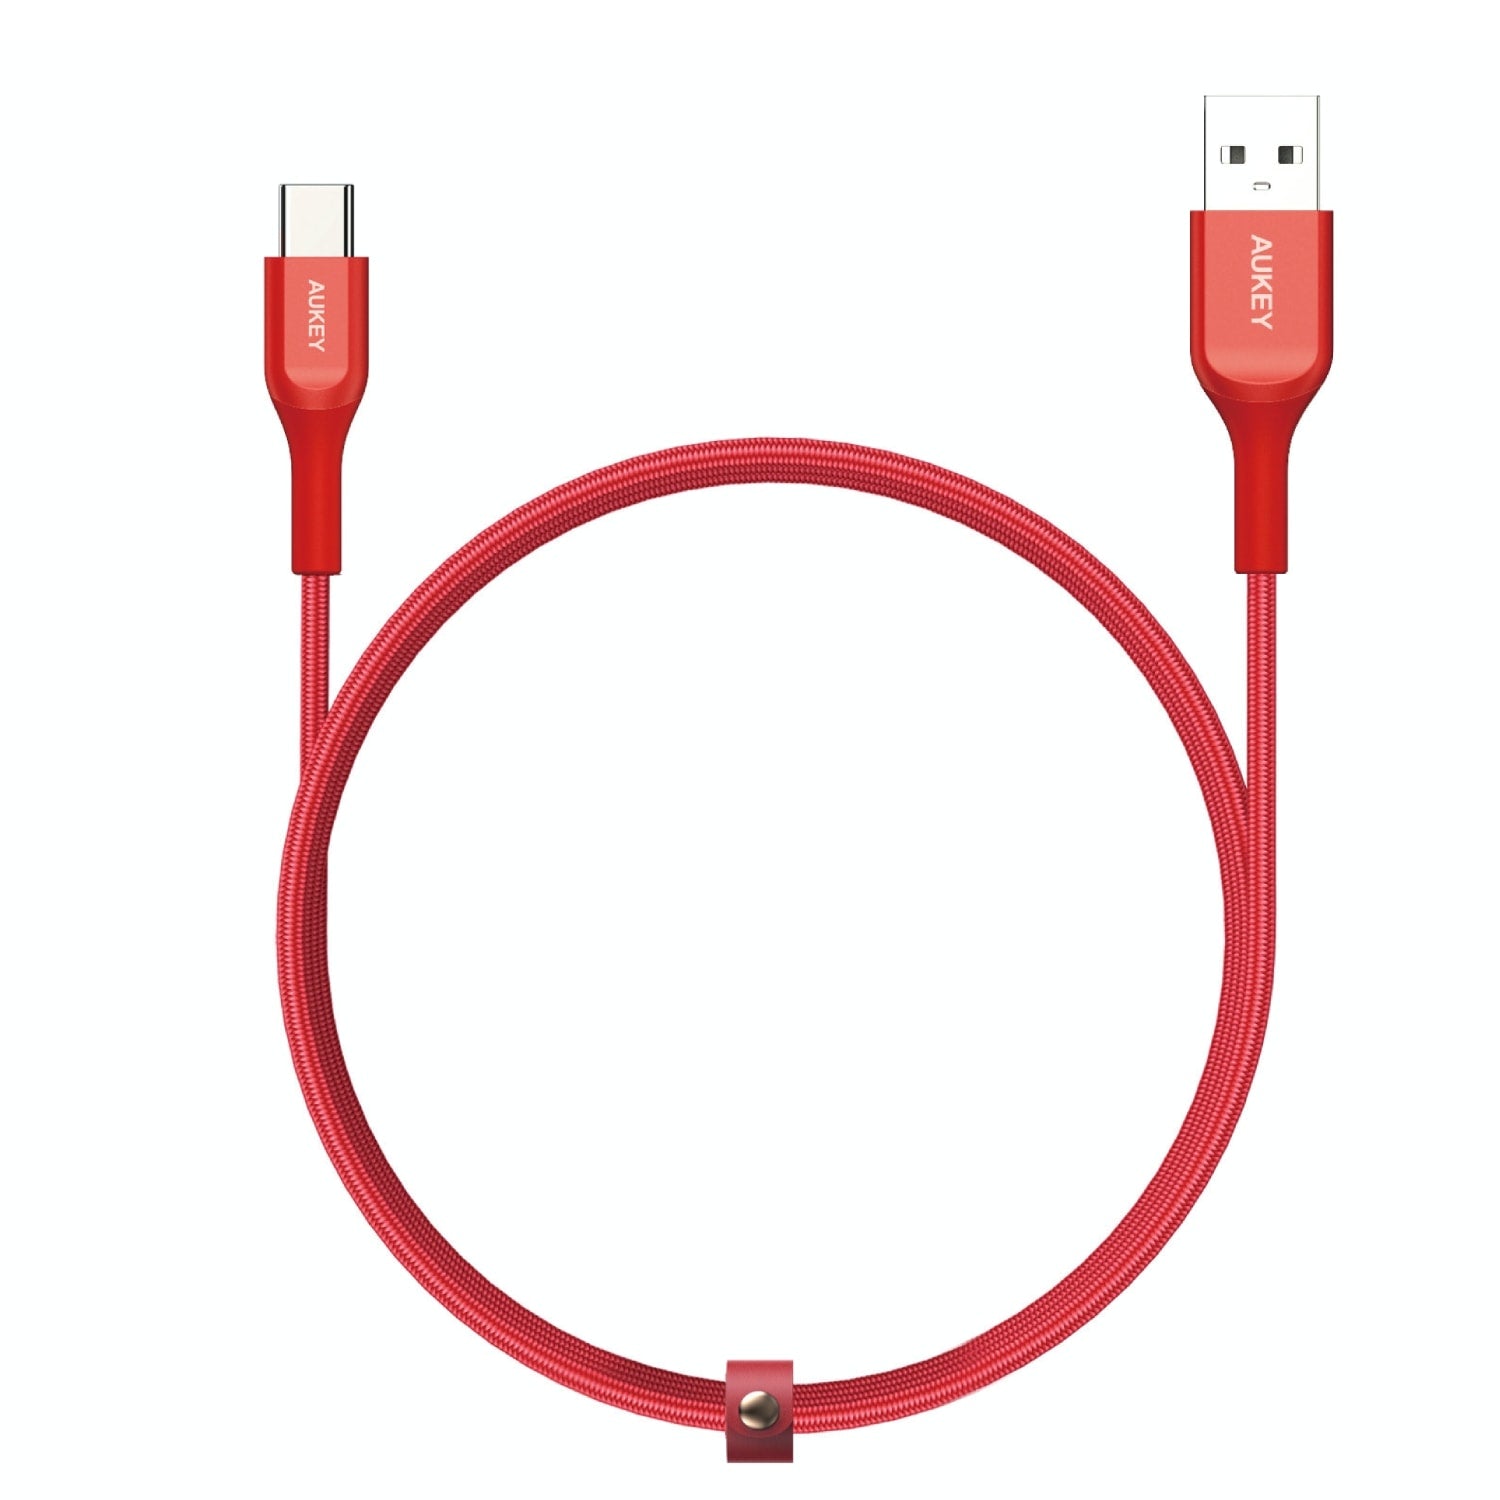 CB-AKC2 USB A To USB C Quick Charge 3.0 Kevlar Cable - 2M